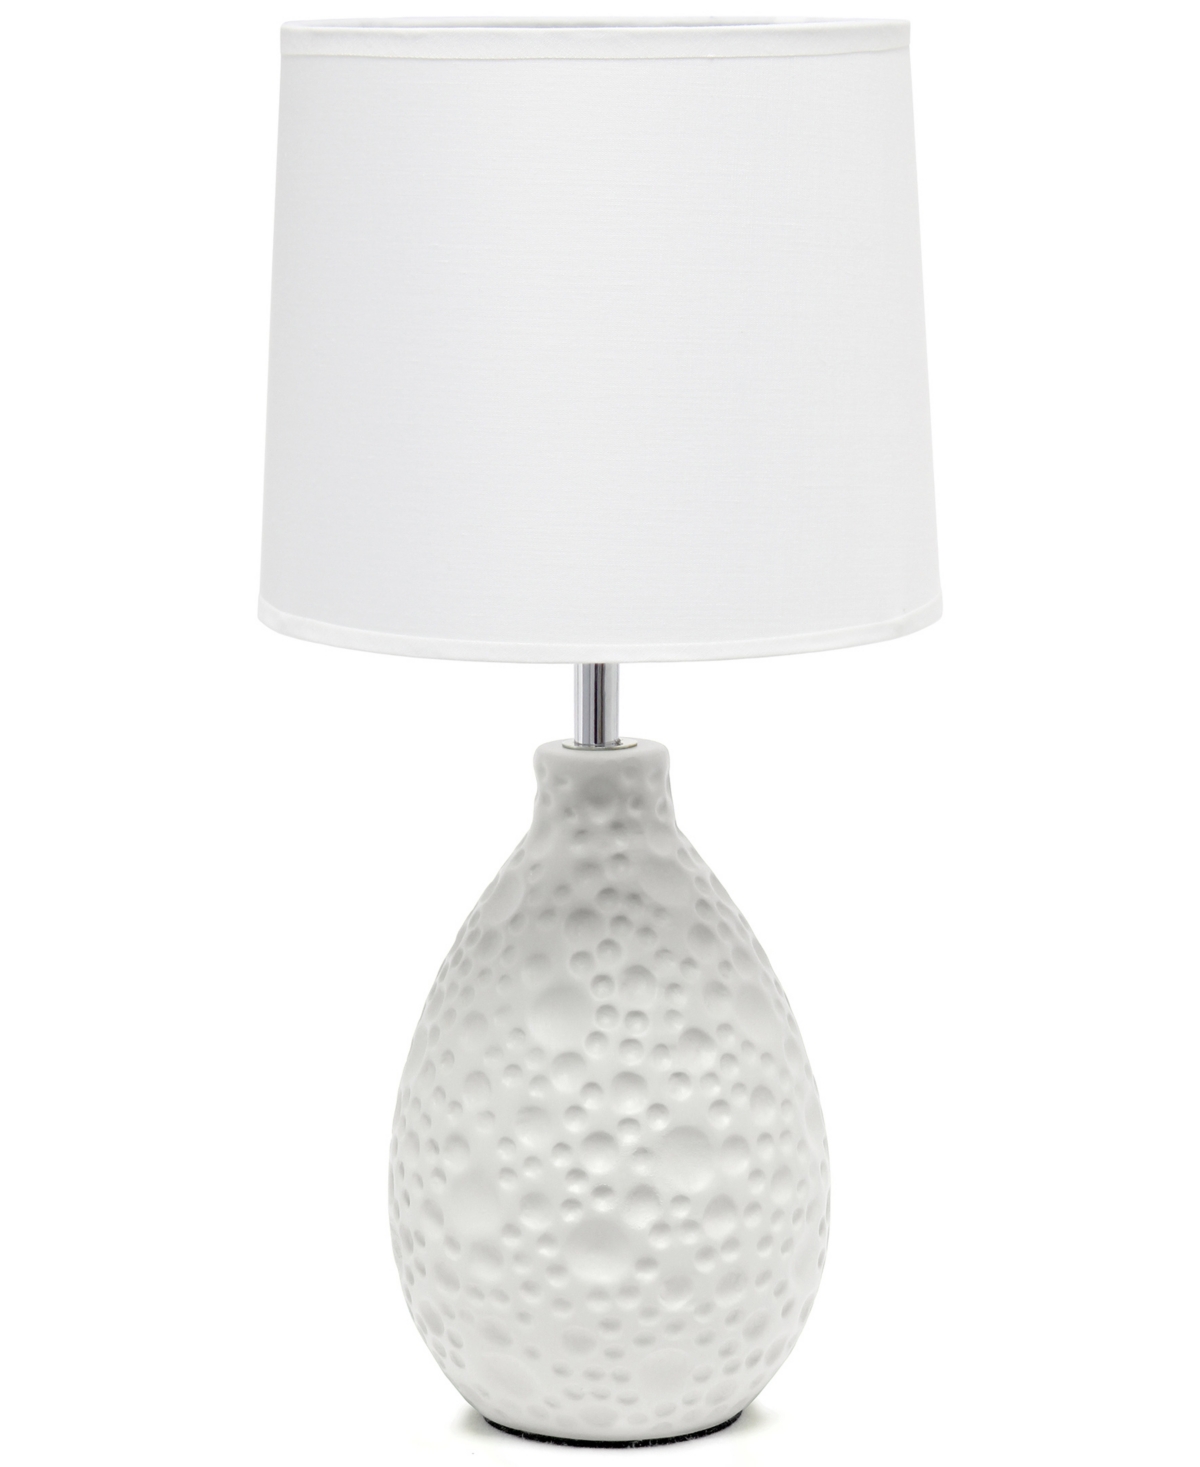 Shop Creekwood Home Essentix 14.17" Traditional Ceramic Textured Thumbprint Tear Drop Shaped Table Desk Lamp In White